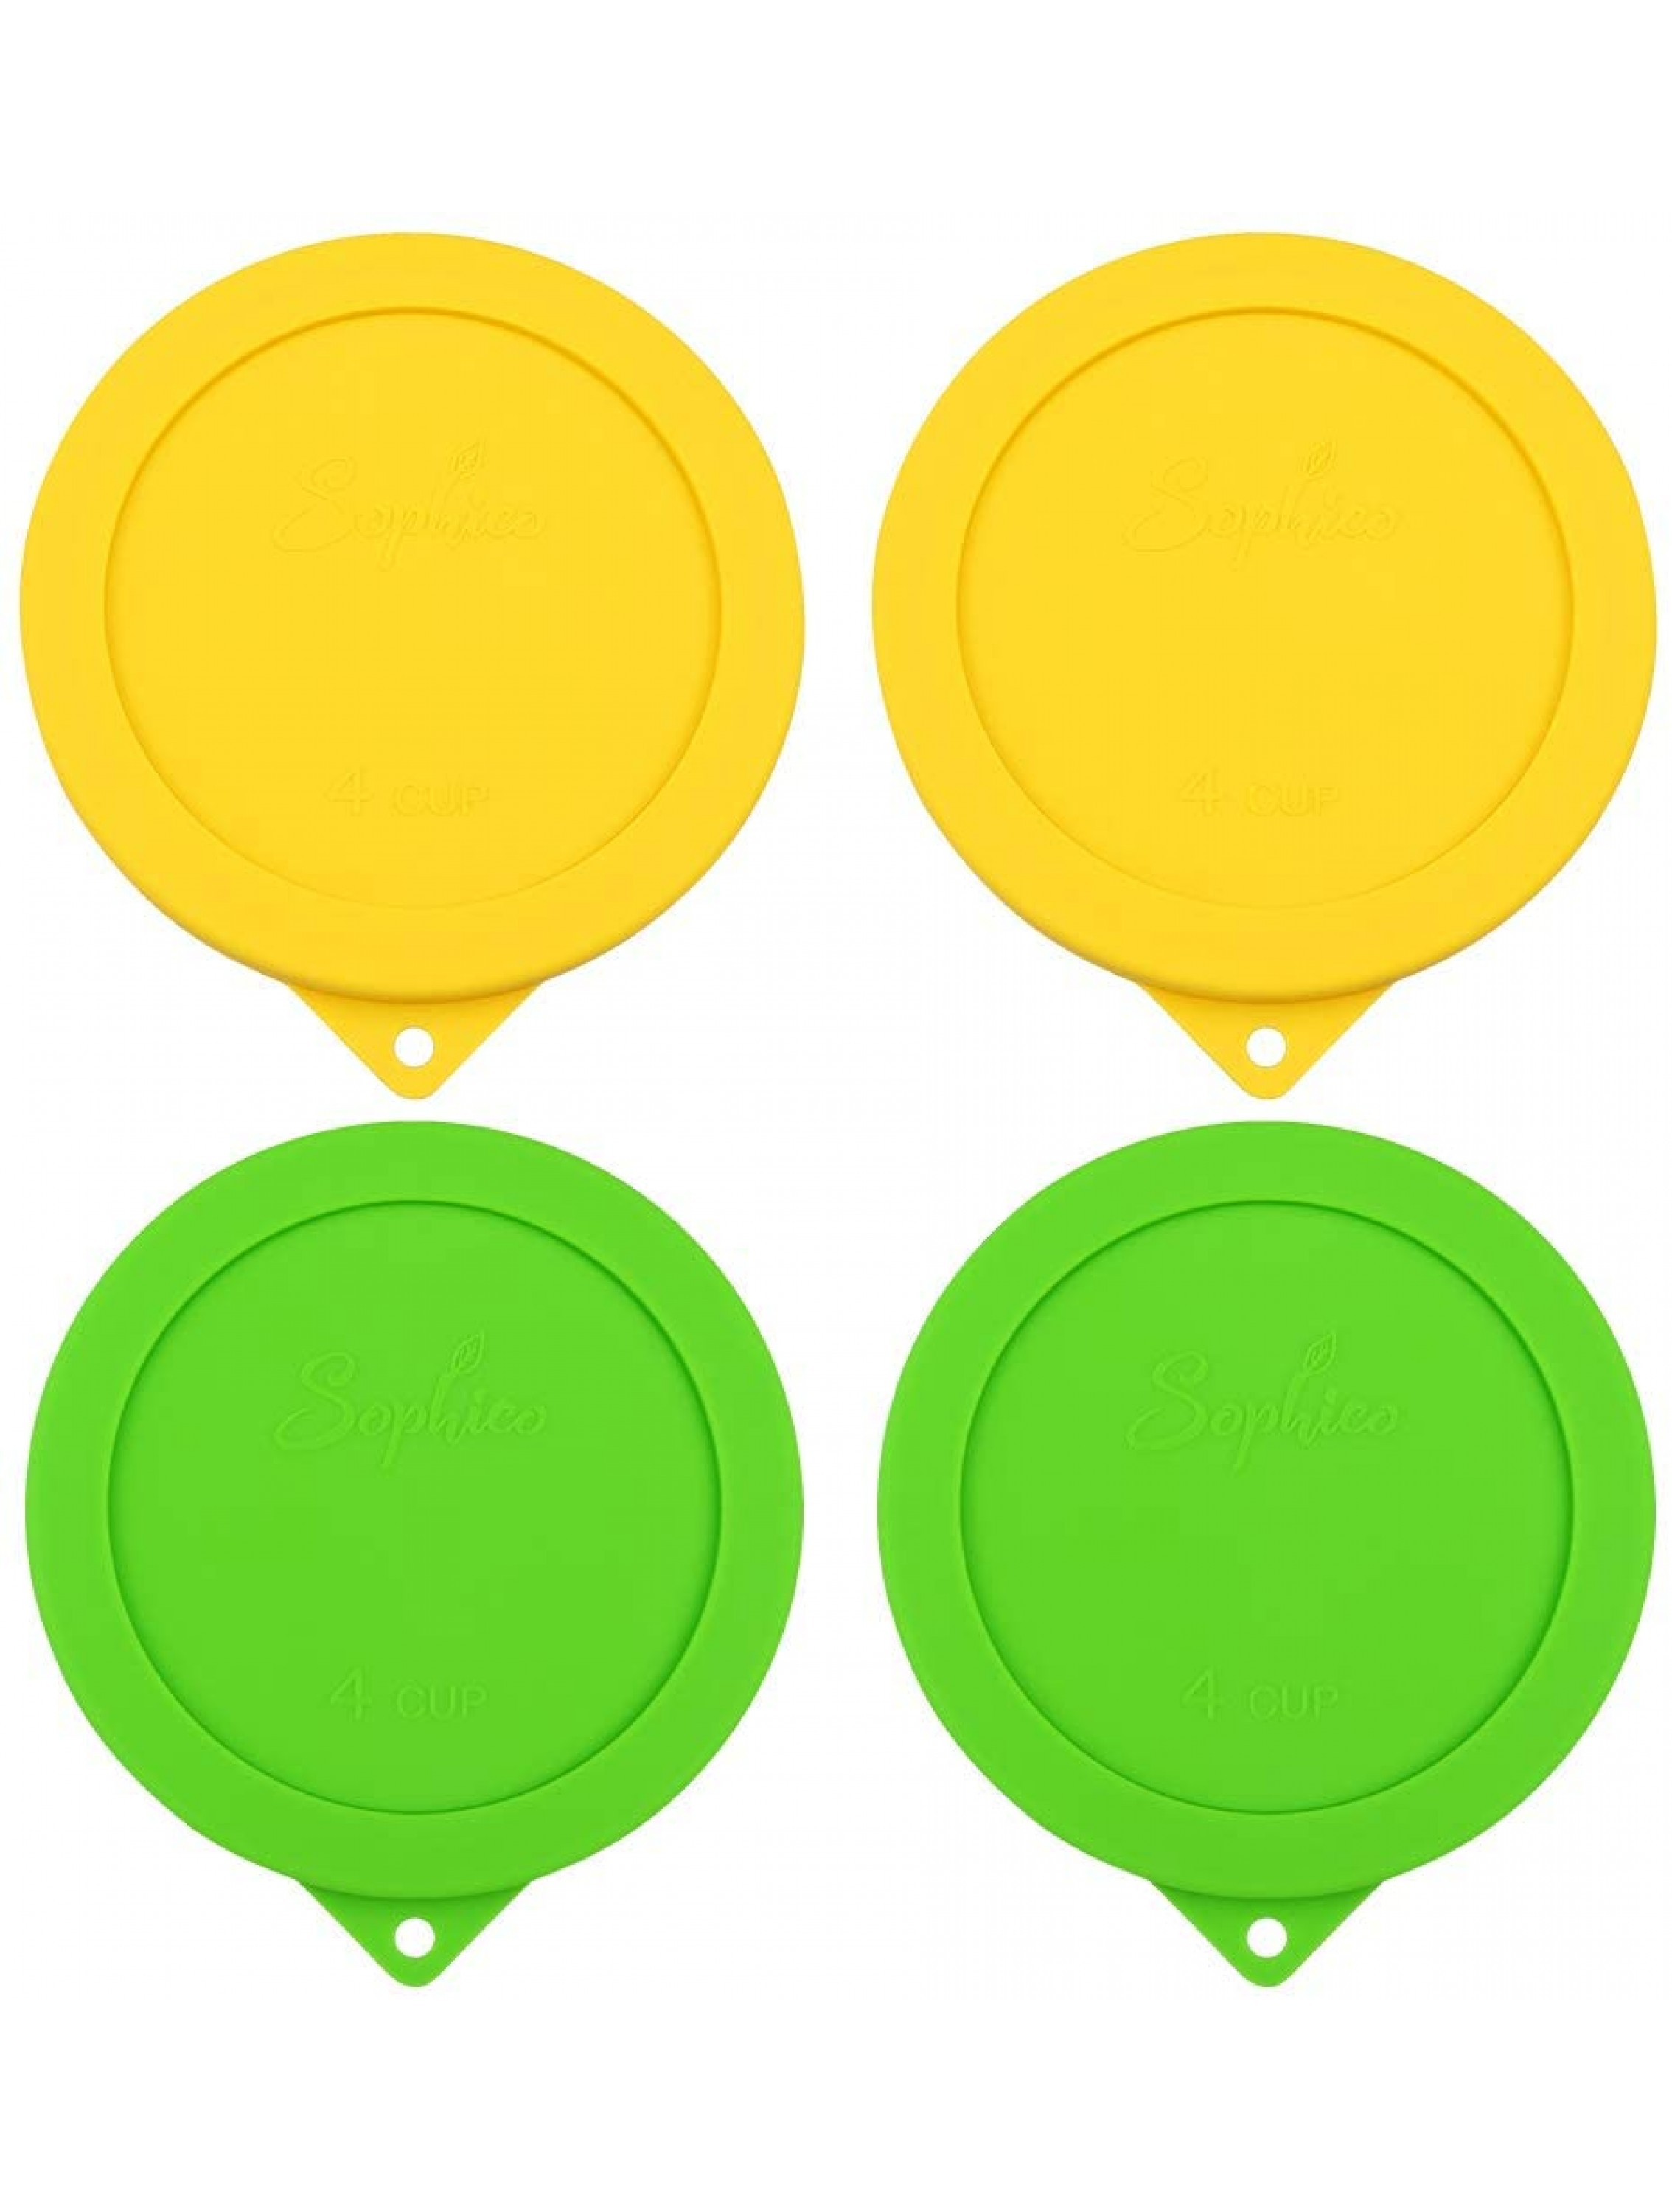 Sophico 4 Cup Round Silicone Storage Cover Lids Replacement for Anchor Hocking and Pyrex 7201-PC Glass Bowls Container not Included Yellow-Green - BWI9GHZ8K